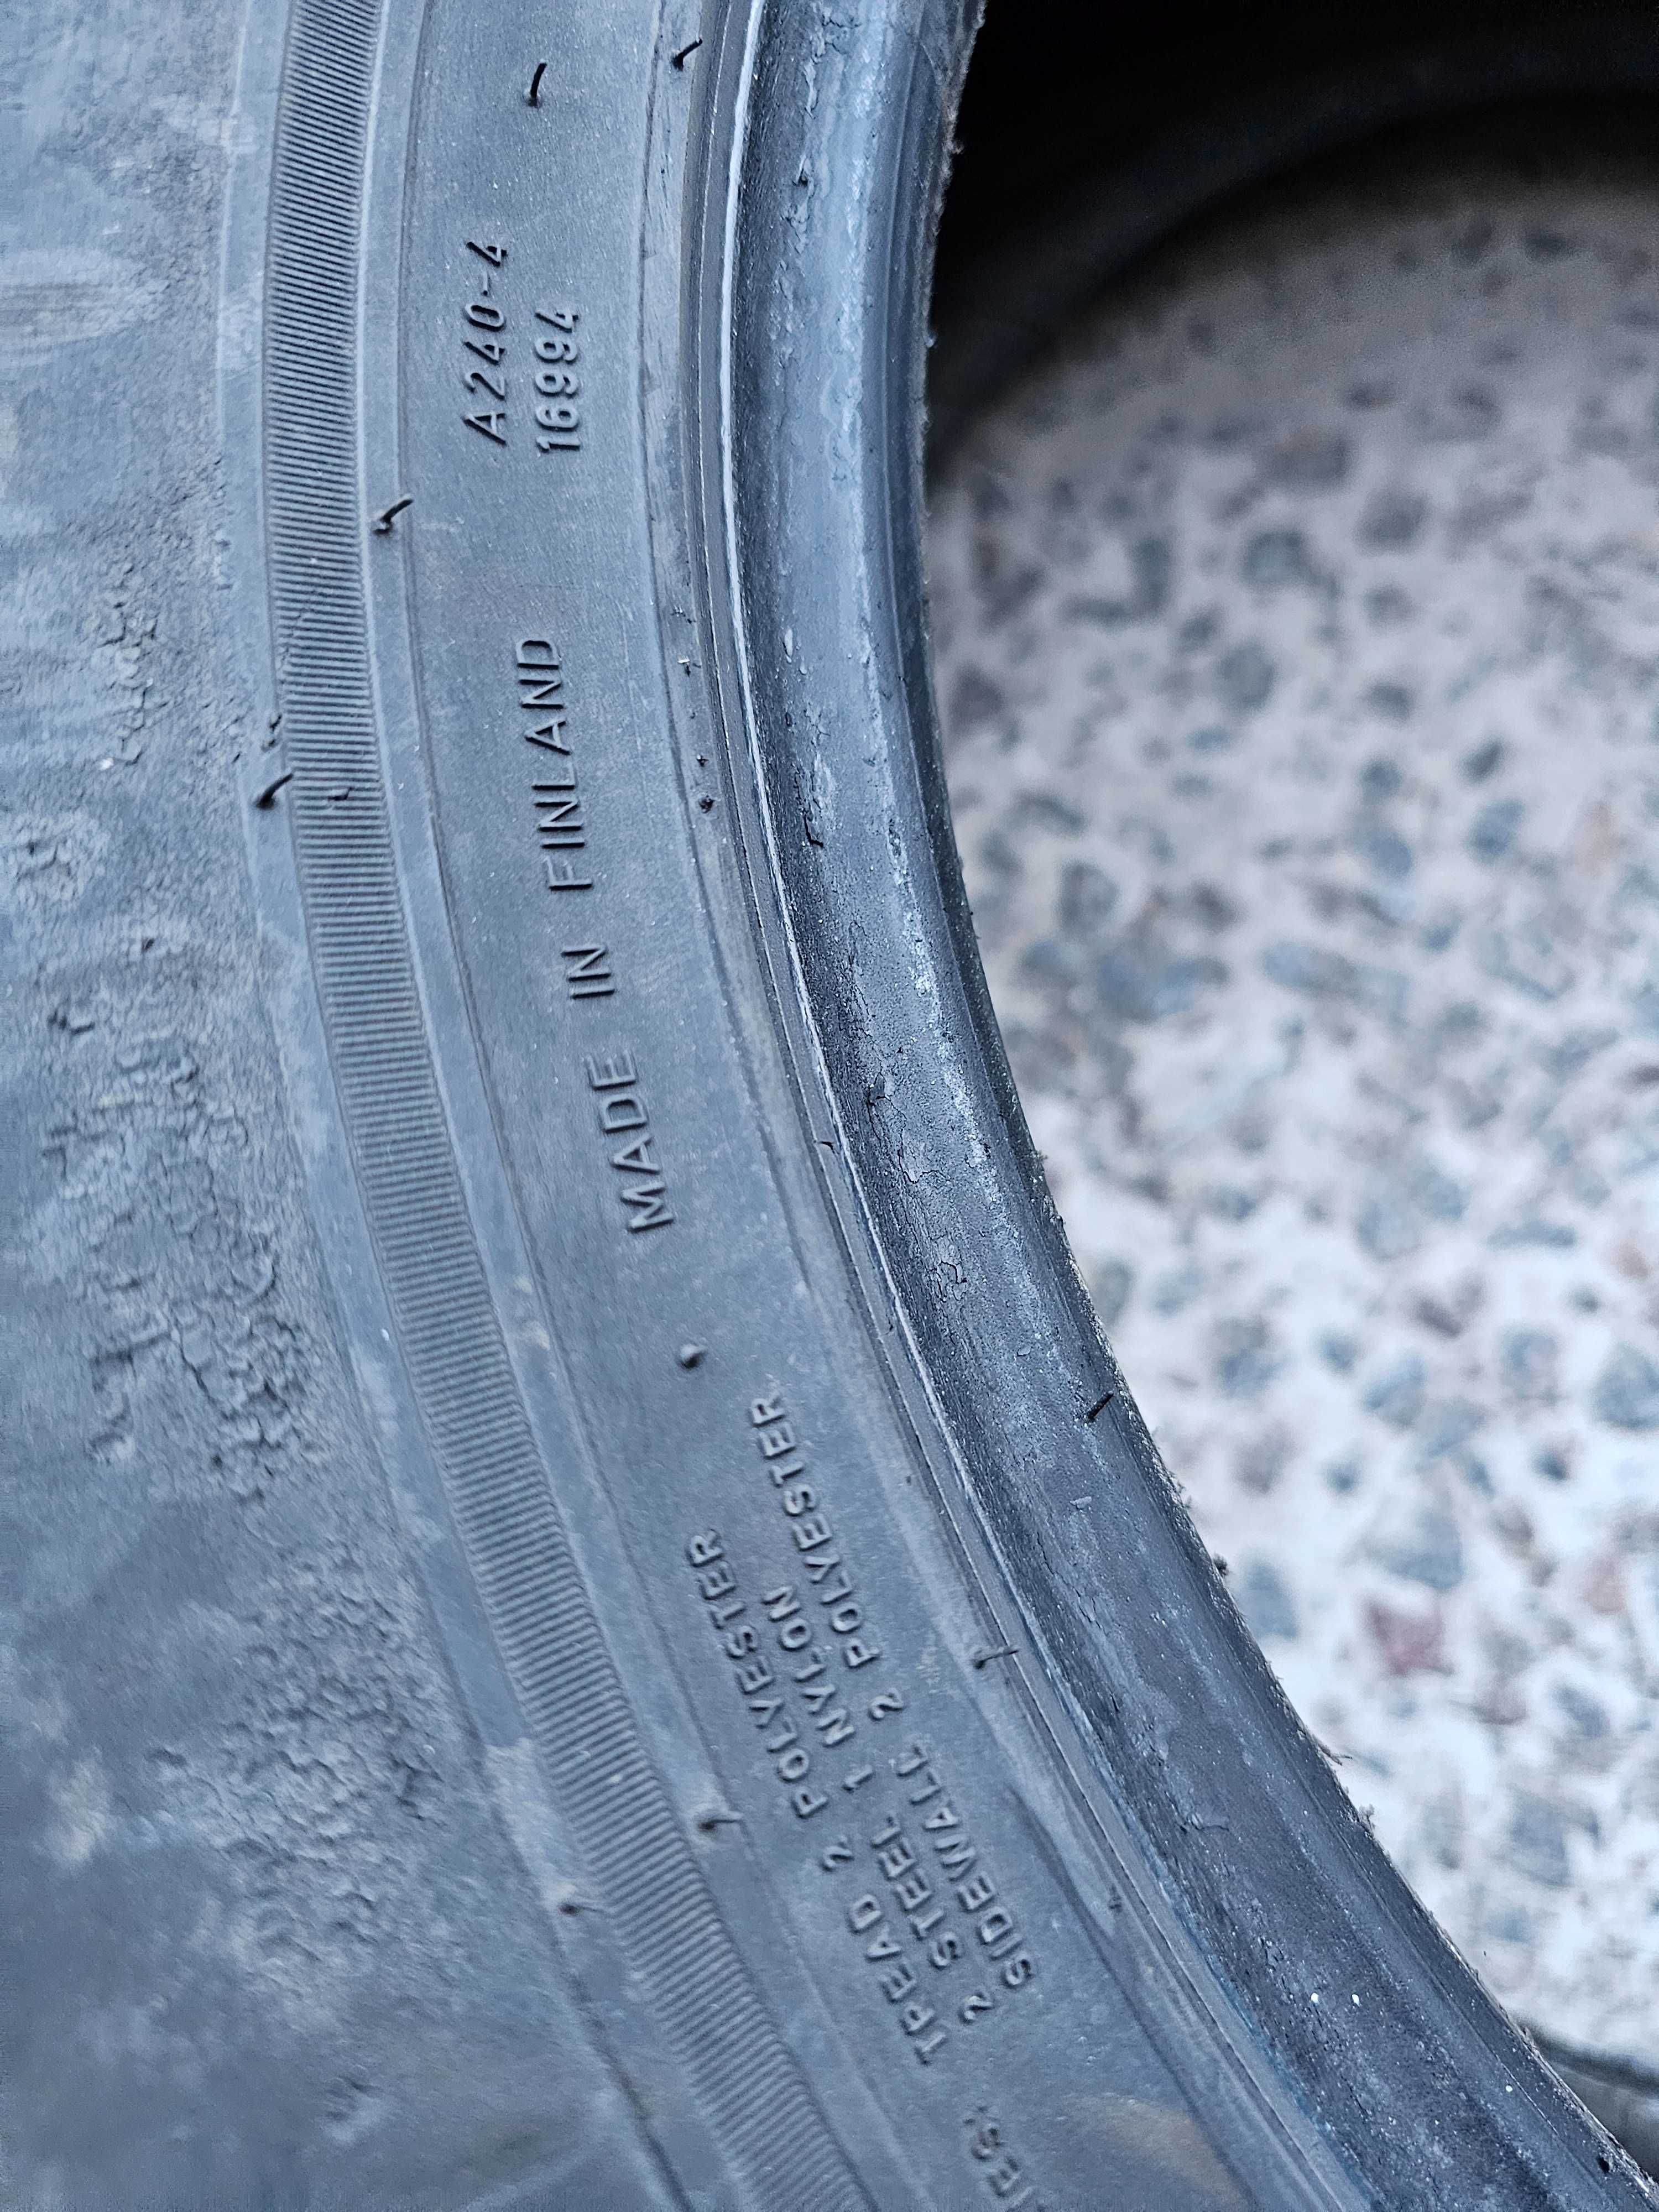 NOKIAN 255 55 R18 покришка